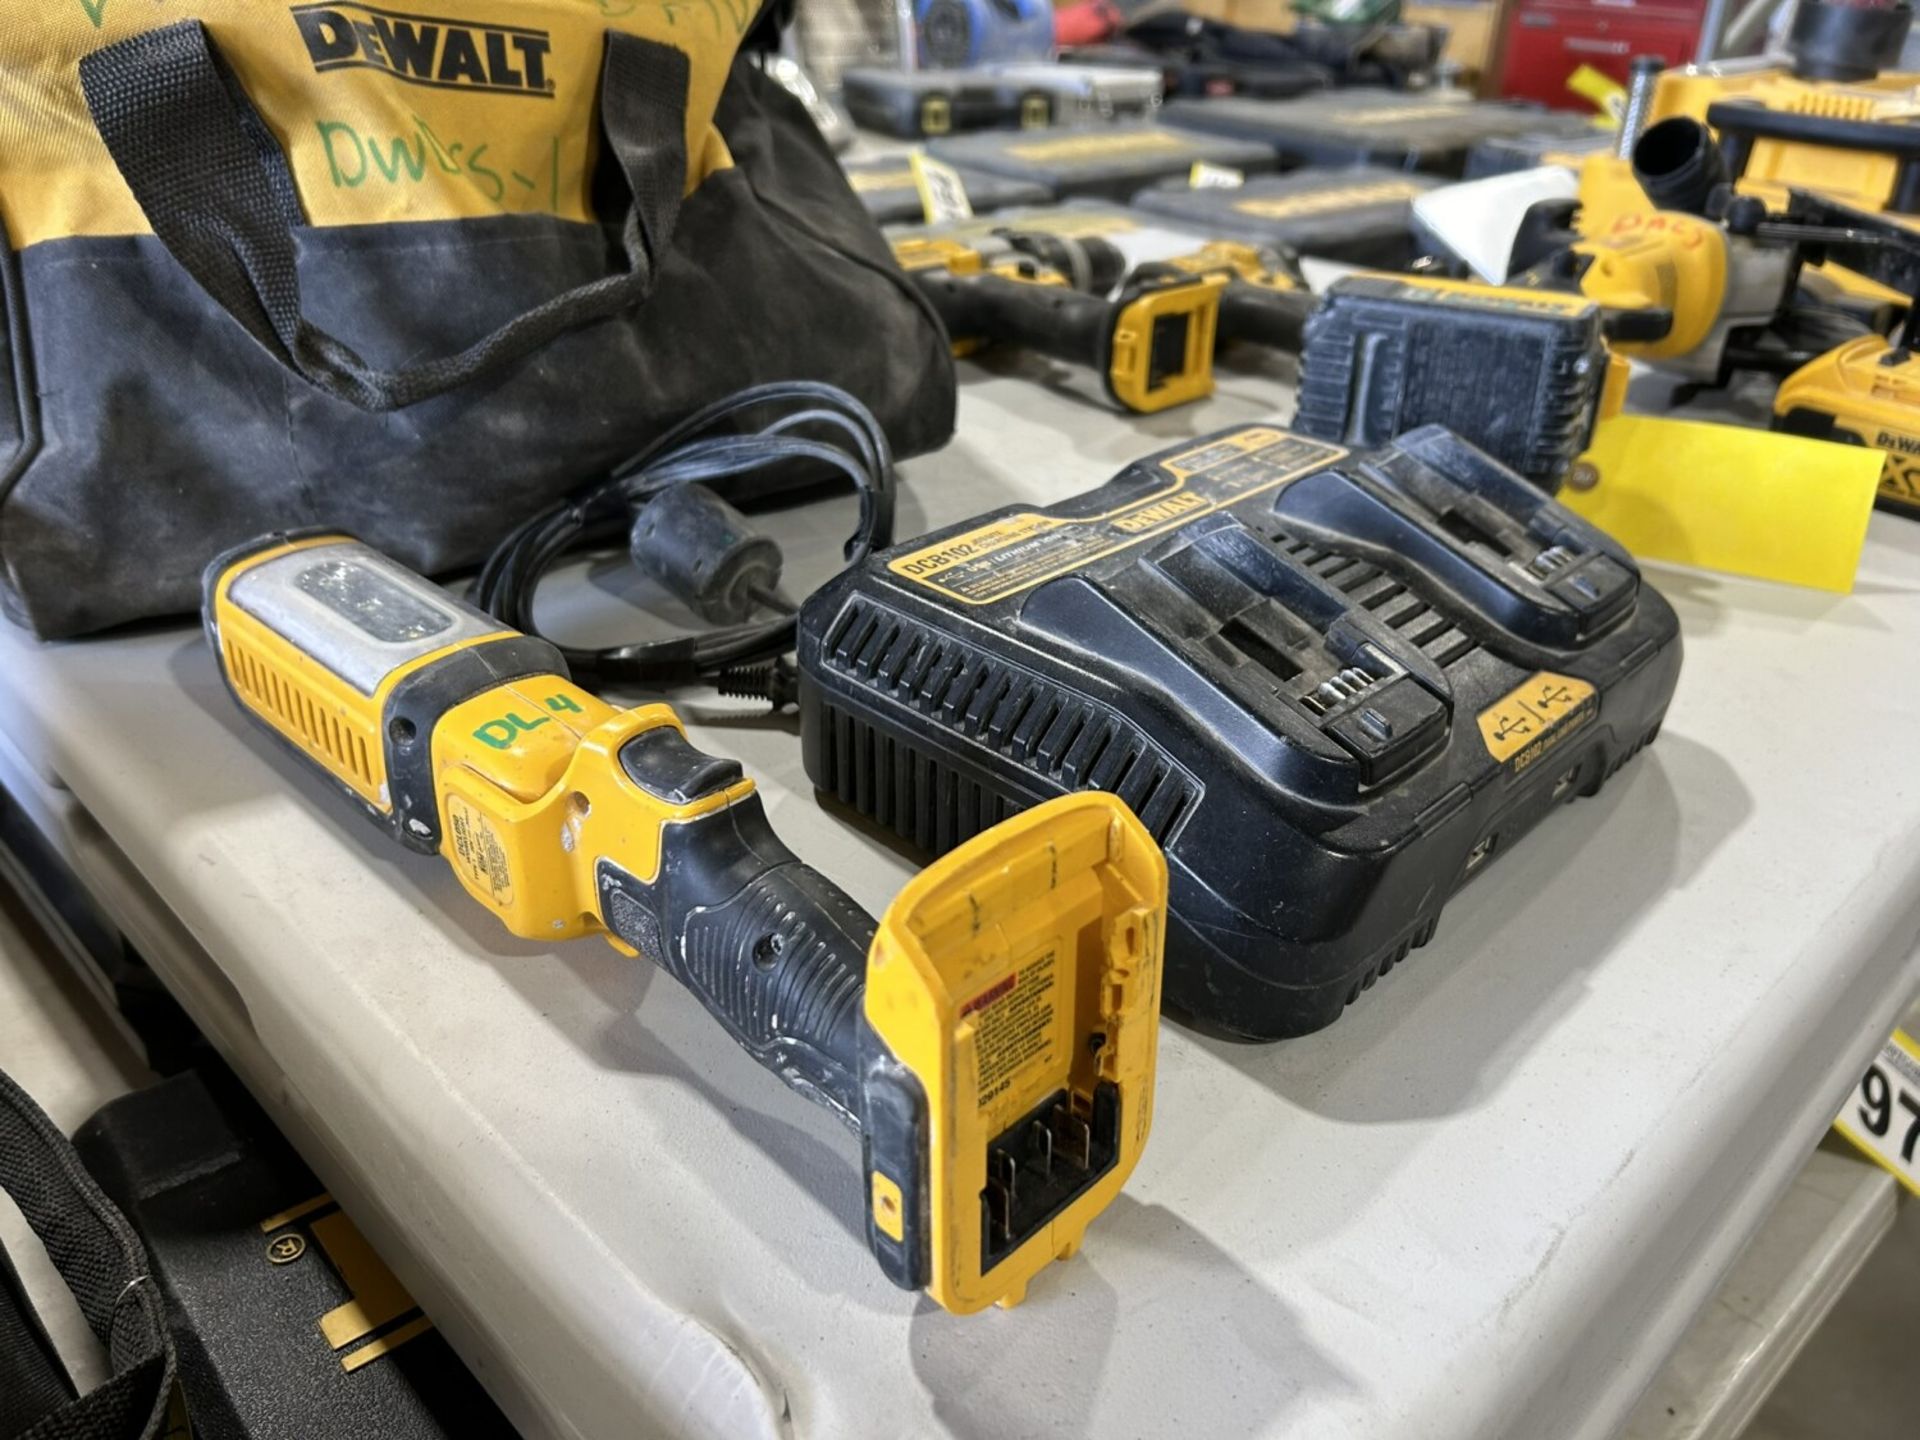 DEWALT CORDLESS 4.25" CIRCULAR SAW, IMPACT DRIVER, DRILL, & LIGHT W/ BATTERY AND CHARGER - Image 10 of 10